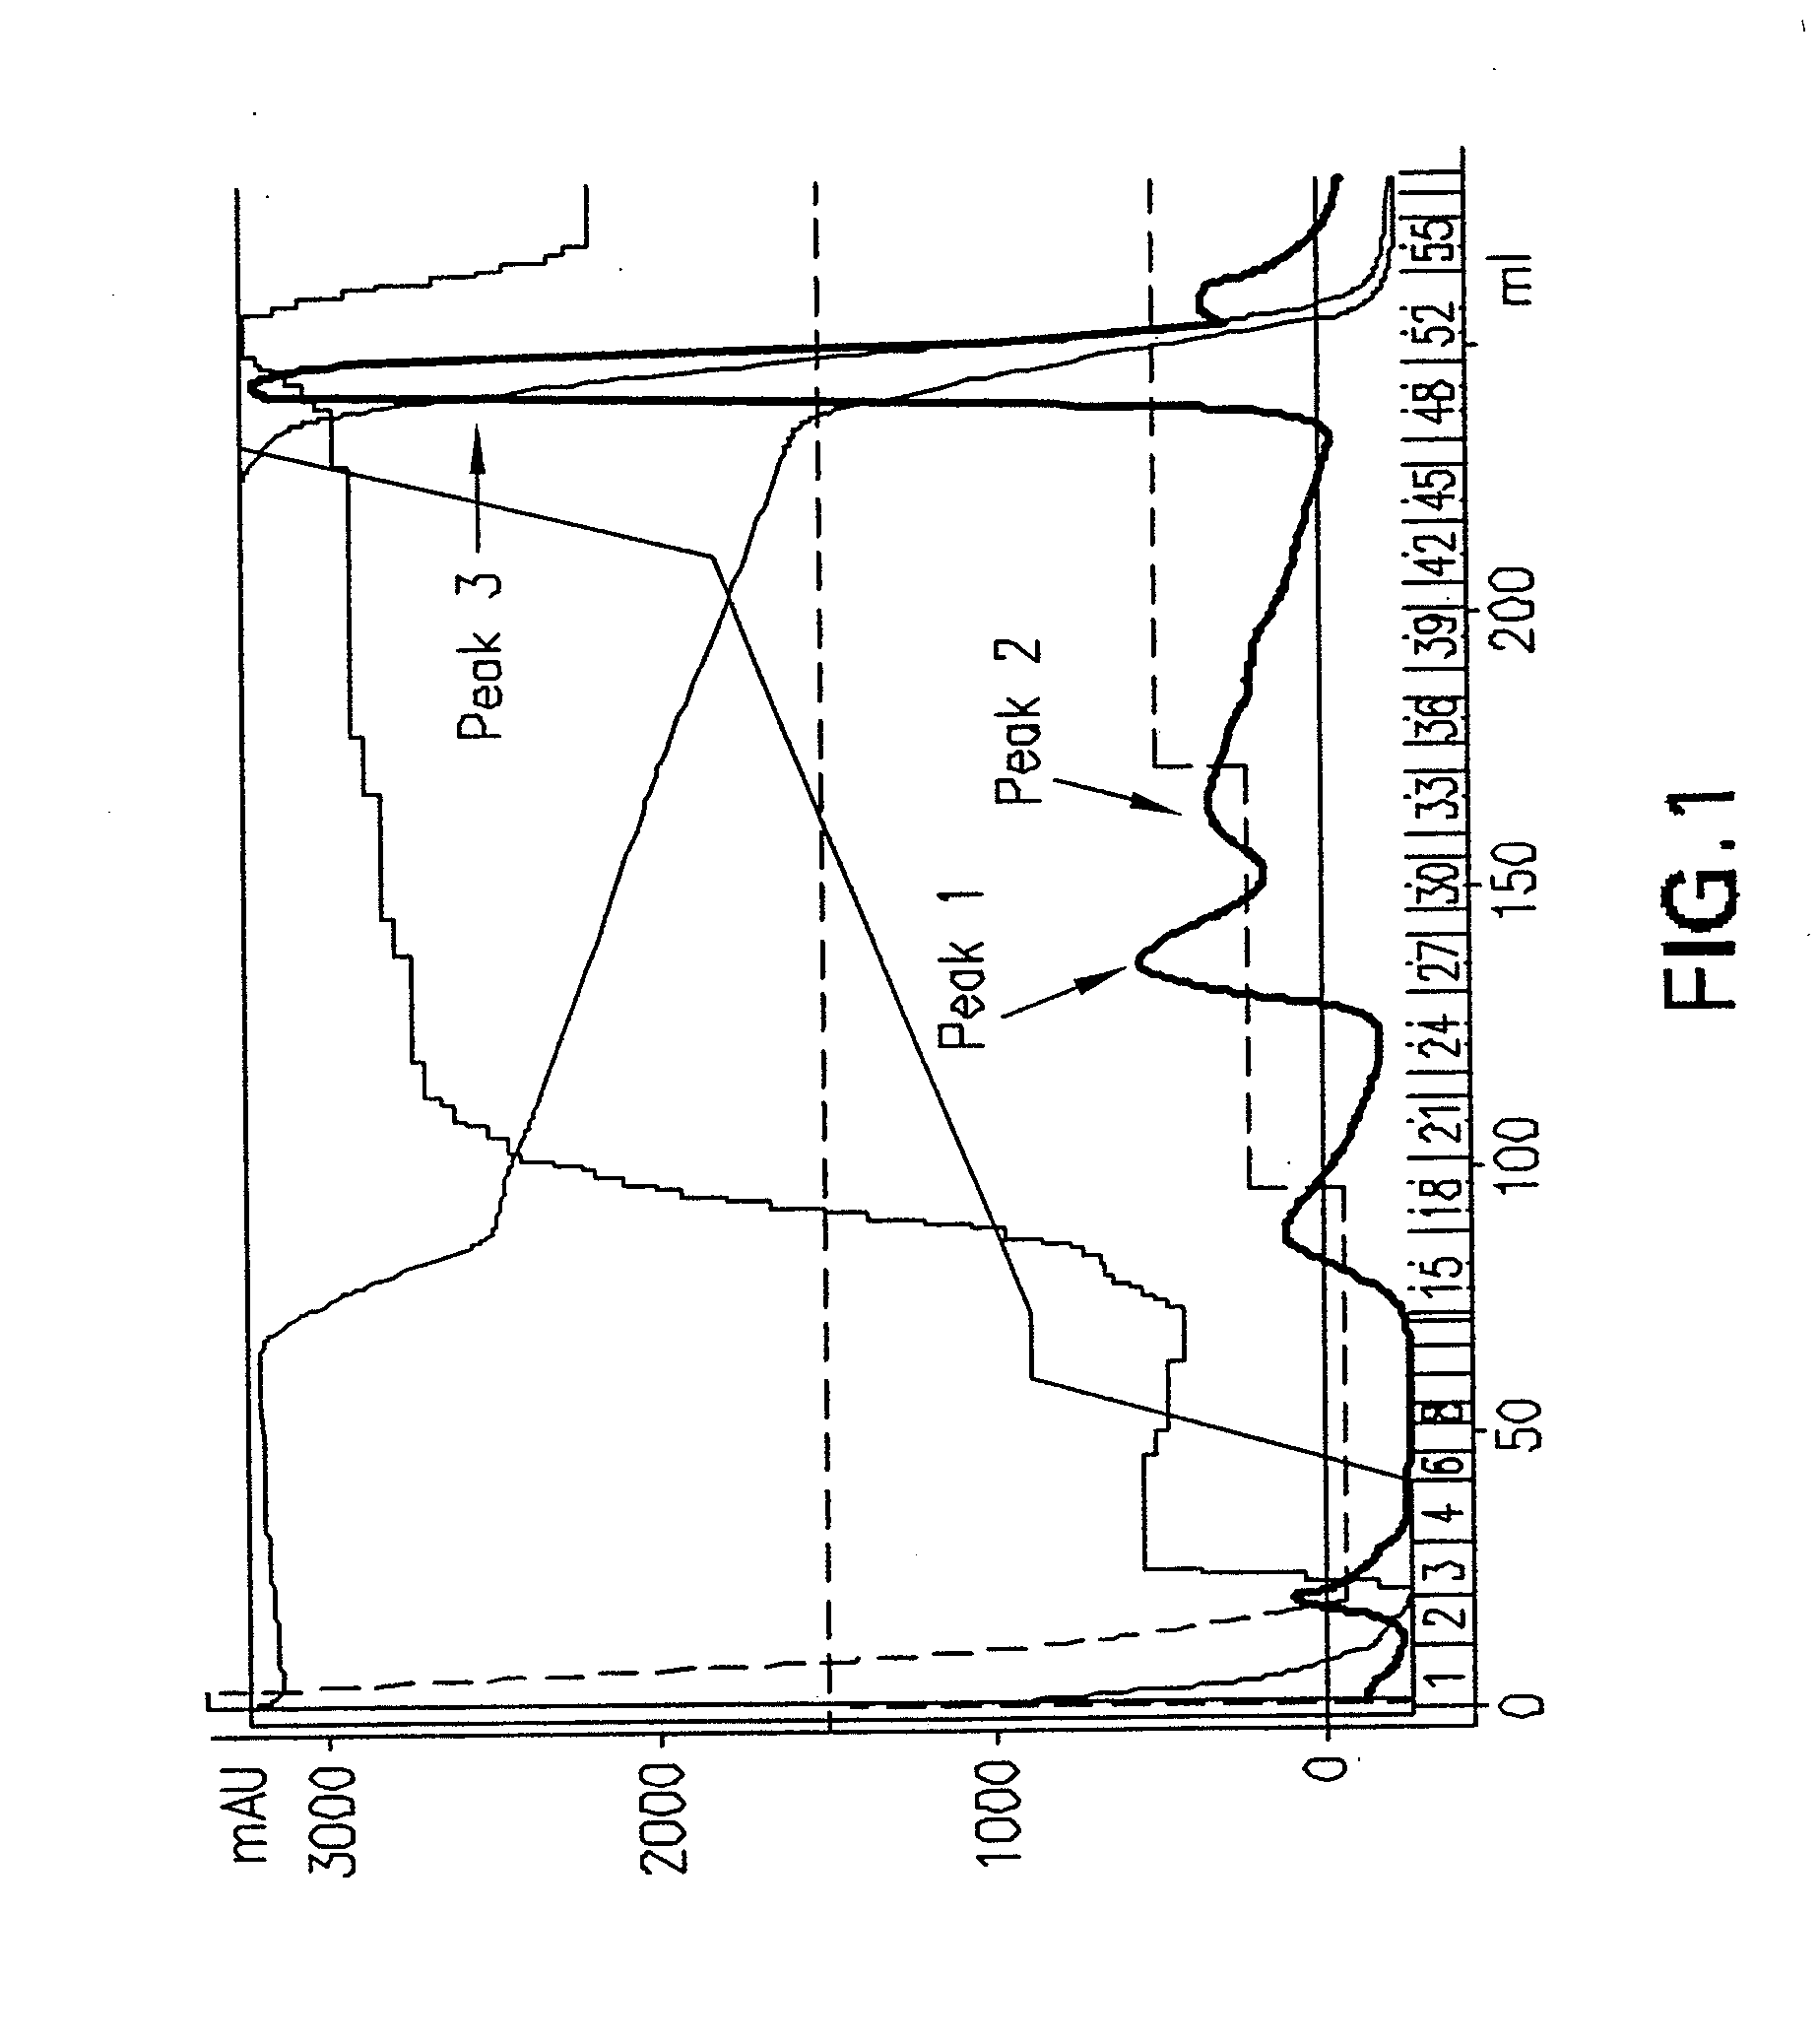 Purification and Isolation of Recombinant Oxalate Degrading Enzymes and Spray-Dried Particles Containing Oxalate Degrading Enzymes